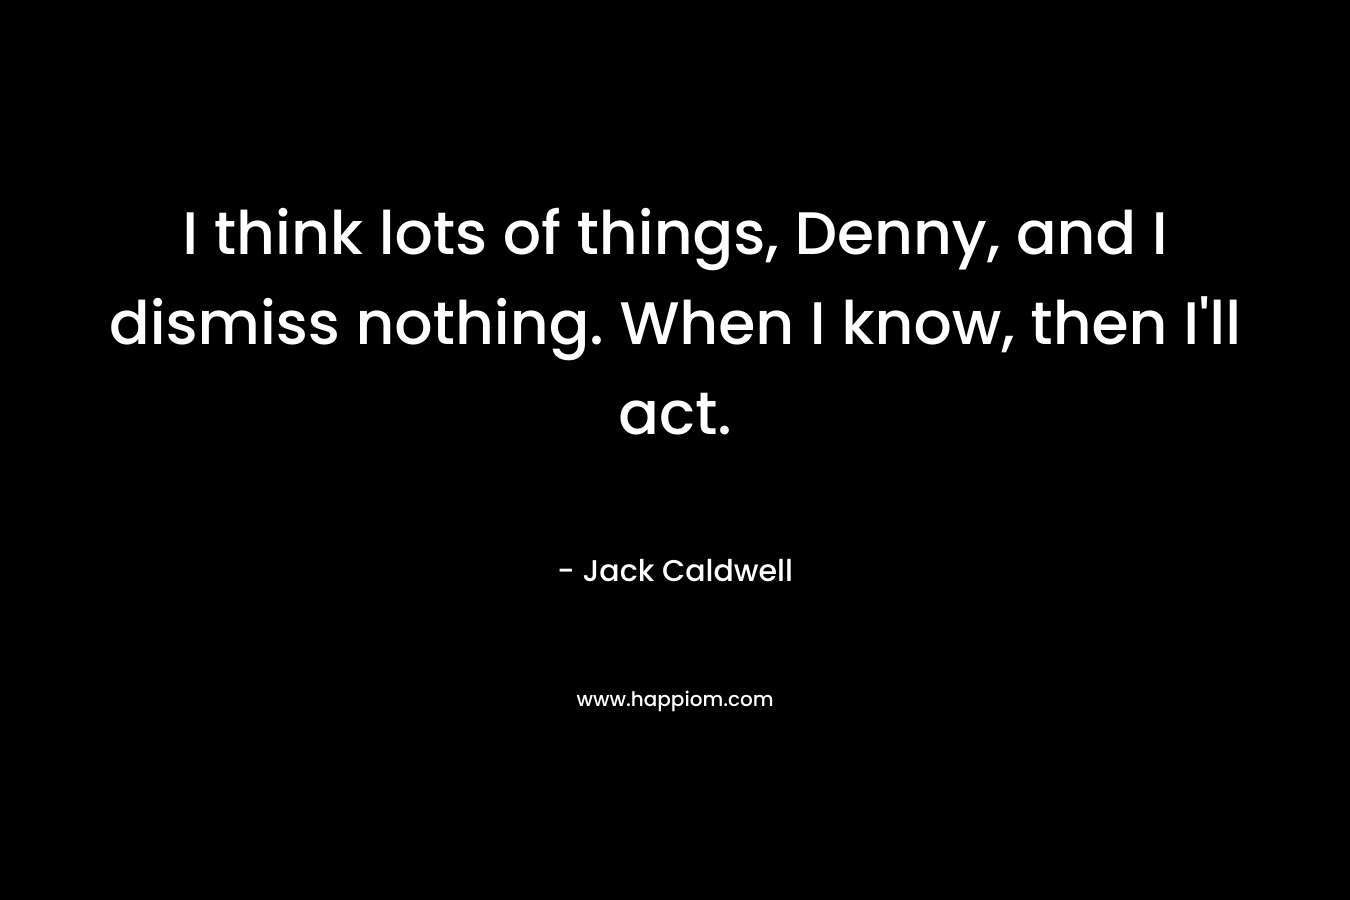 I think lots of things, Denny, and I dismiss nothing. When I know, then I'll act.